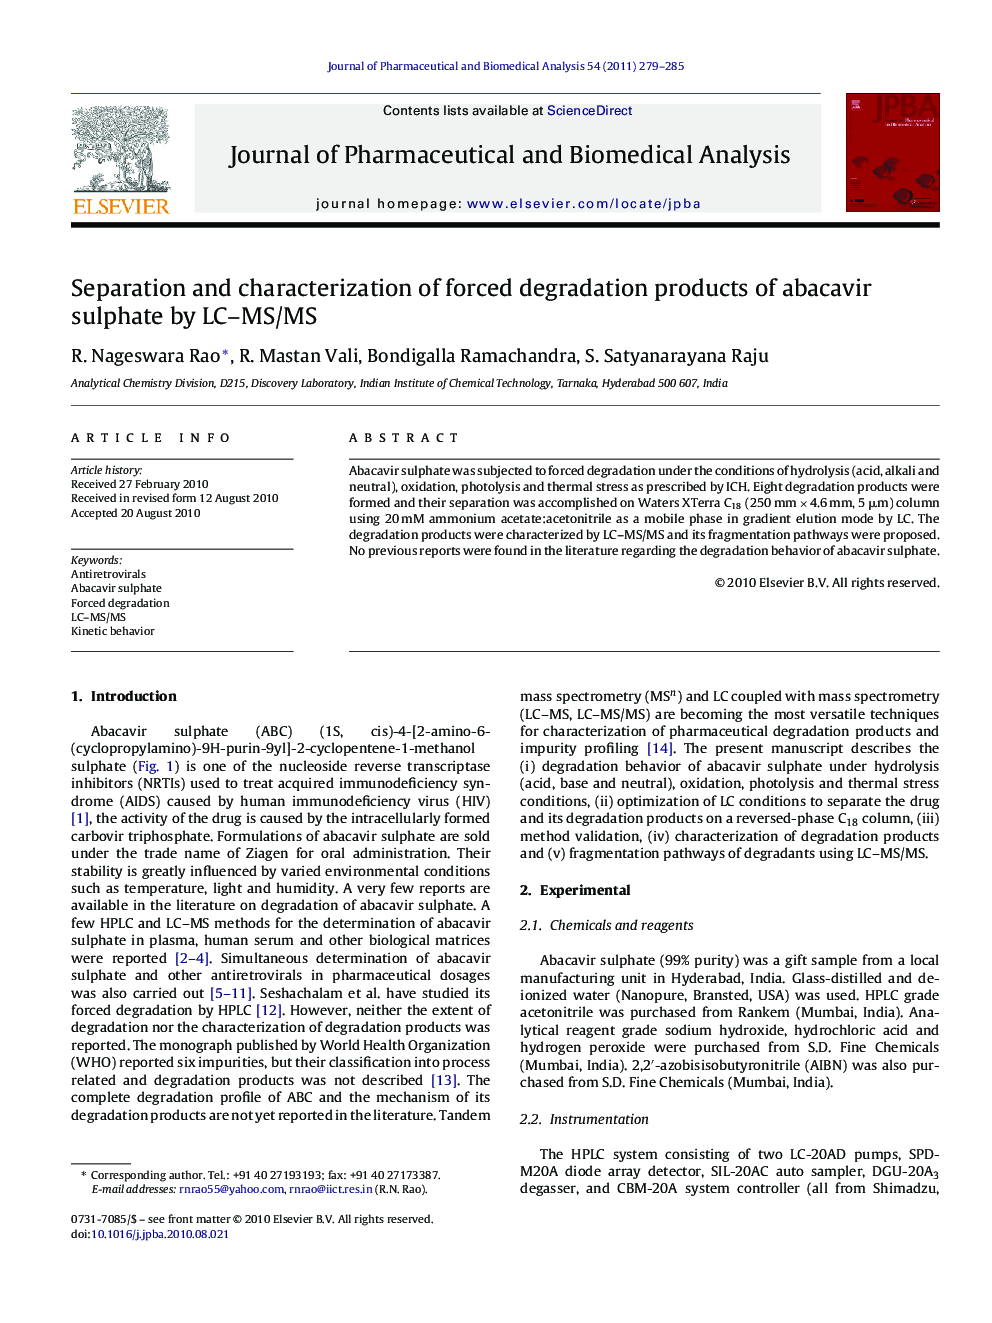 Separation and characterization of forced degradation products of abacavir sulphate by LC–MS/MS